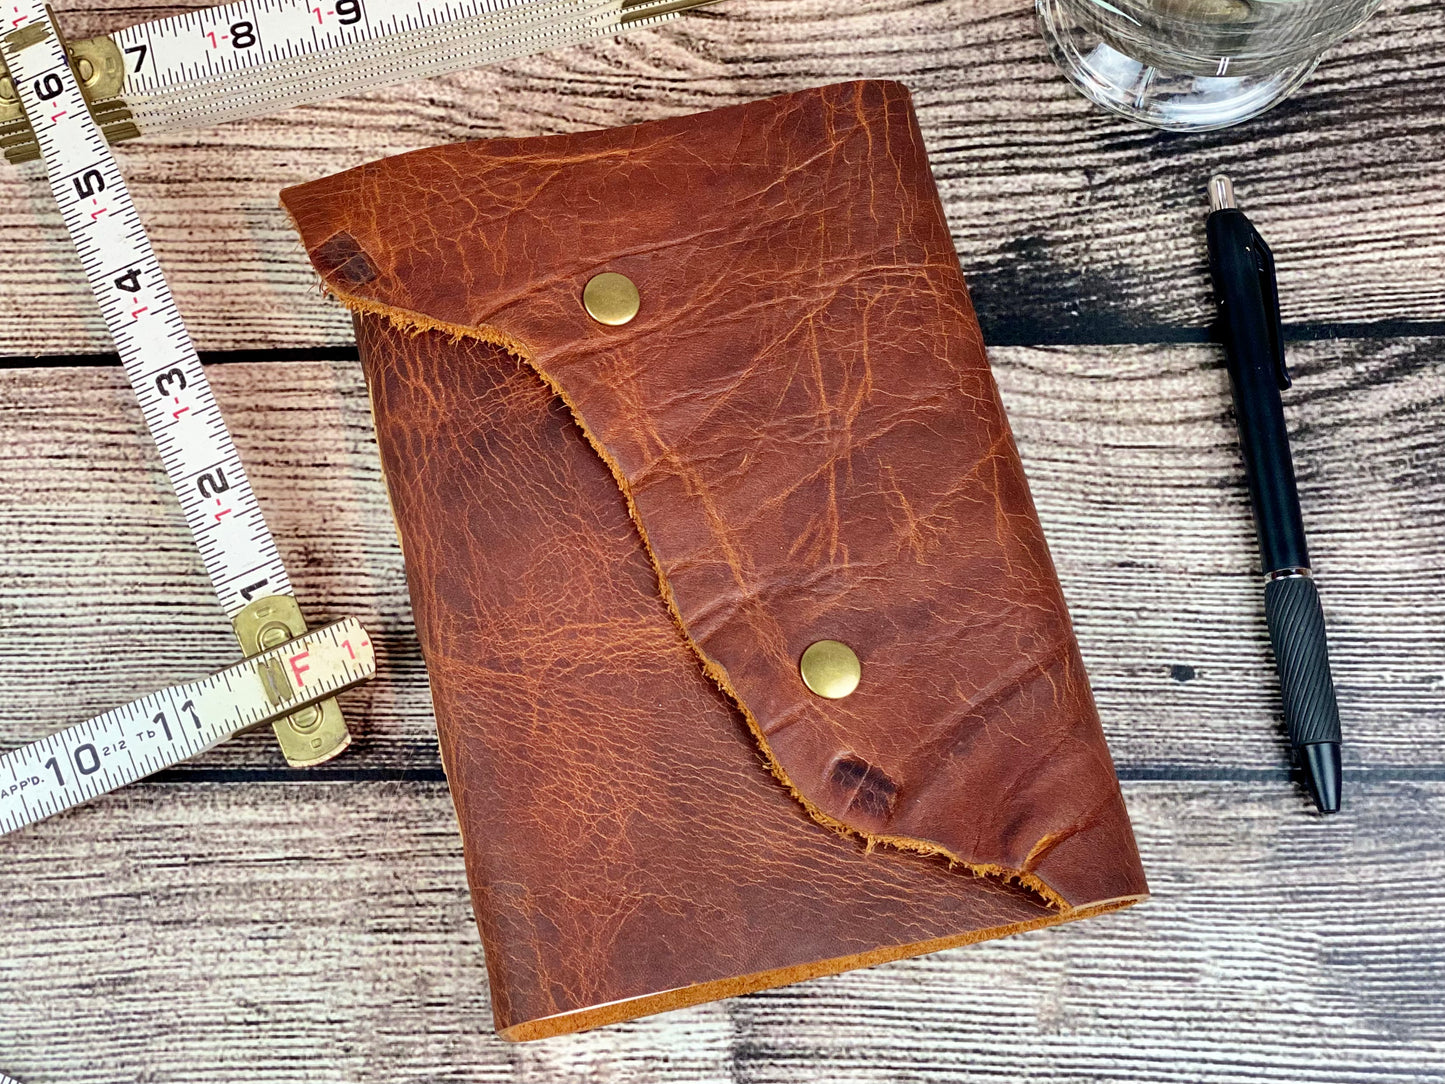 Medium Leather Journal - Rustic Red-Gold with snaps